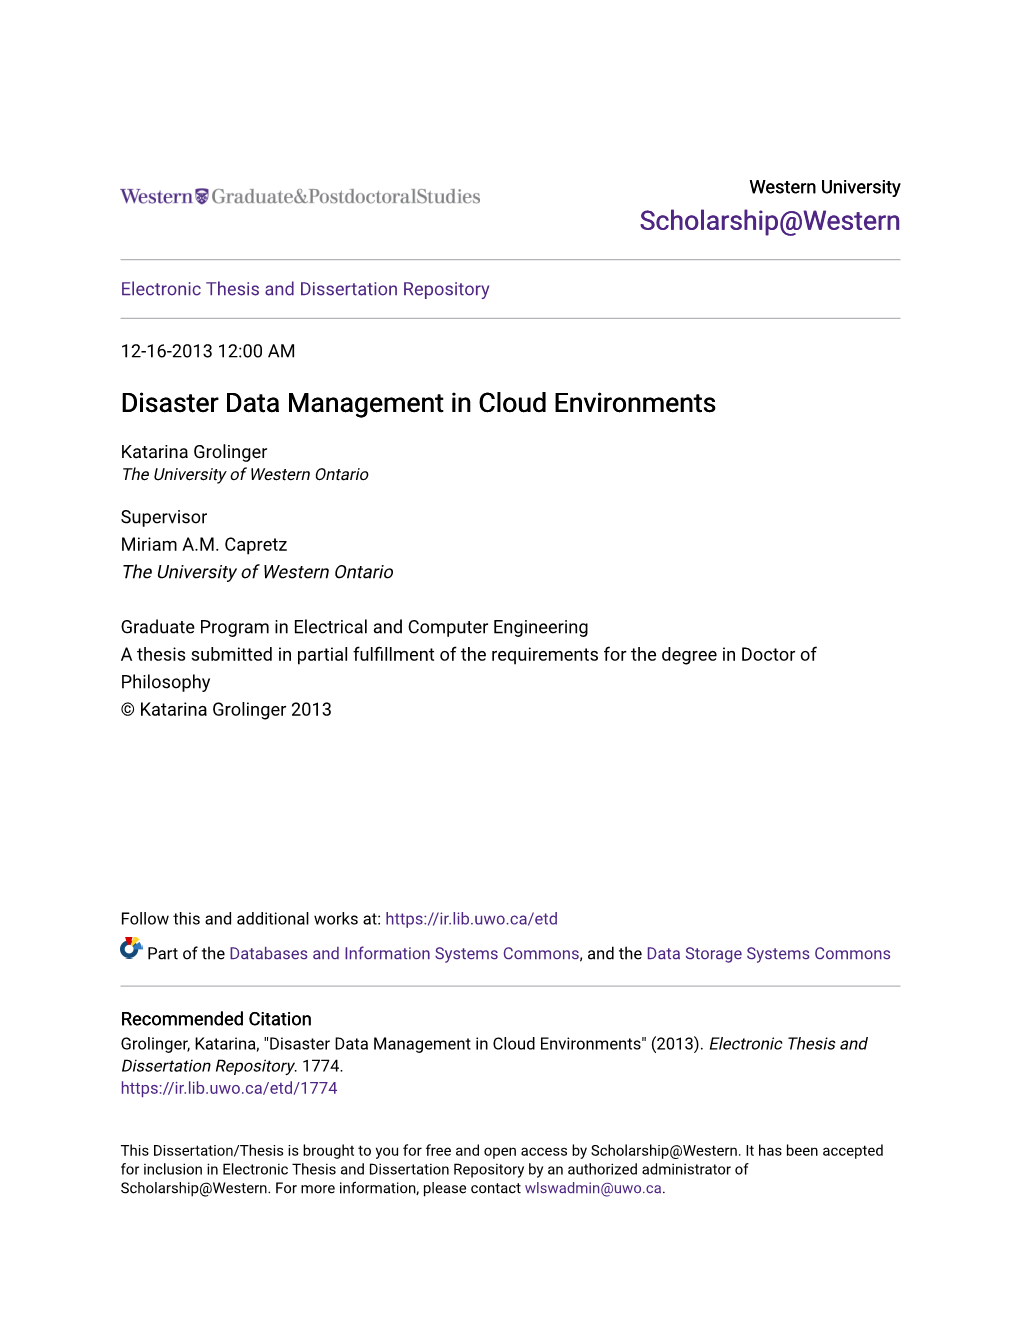 Disaster Data Management in Cloud Environments